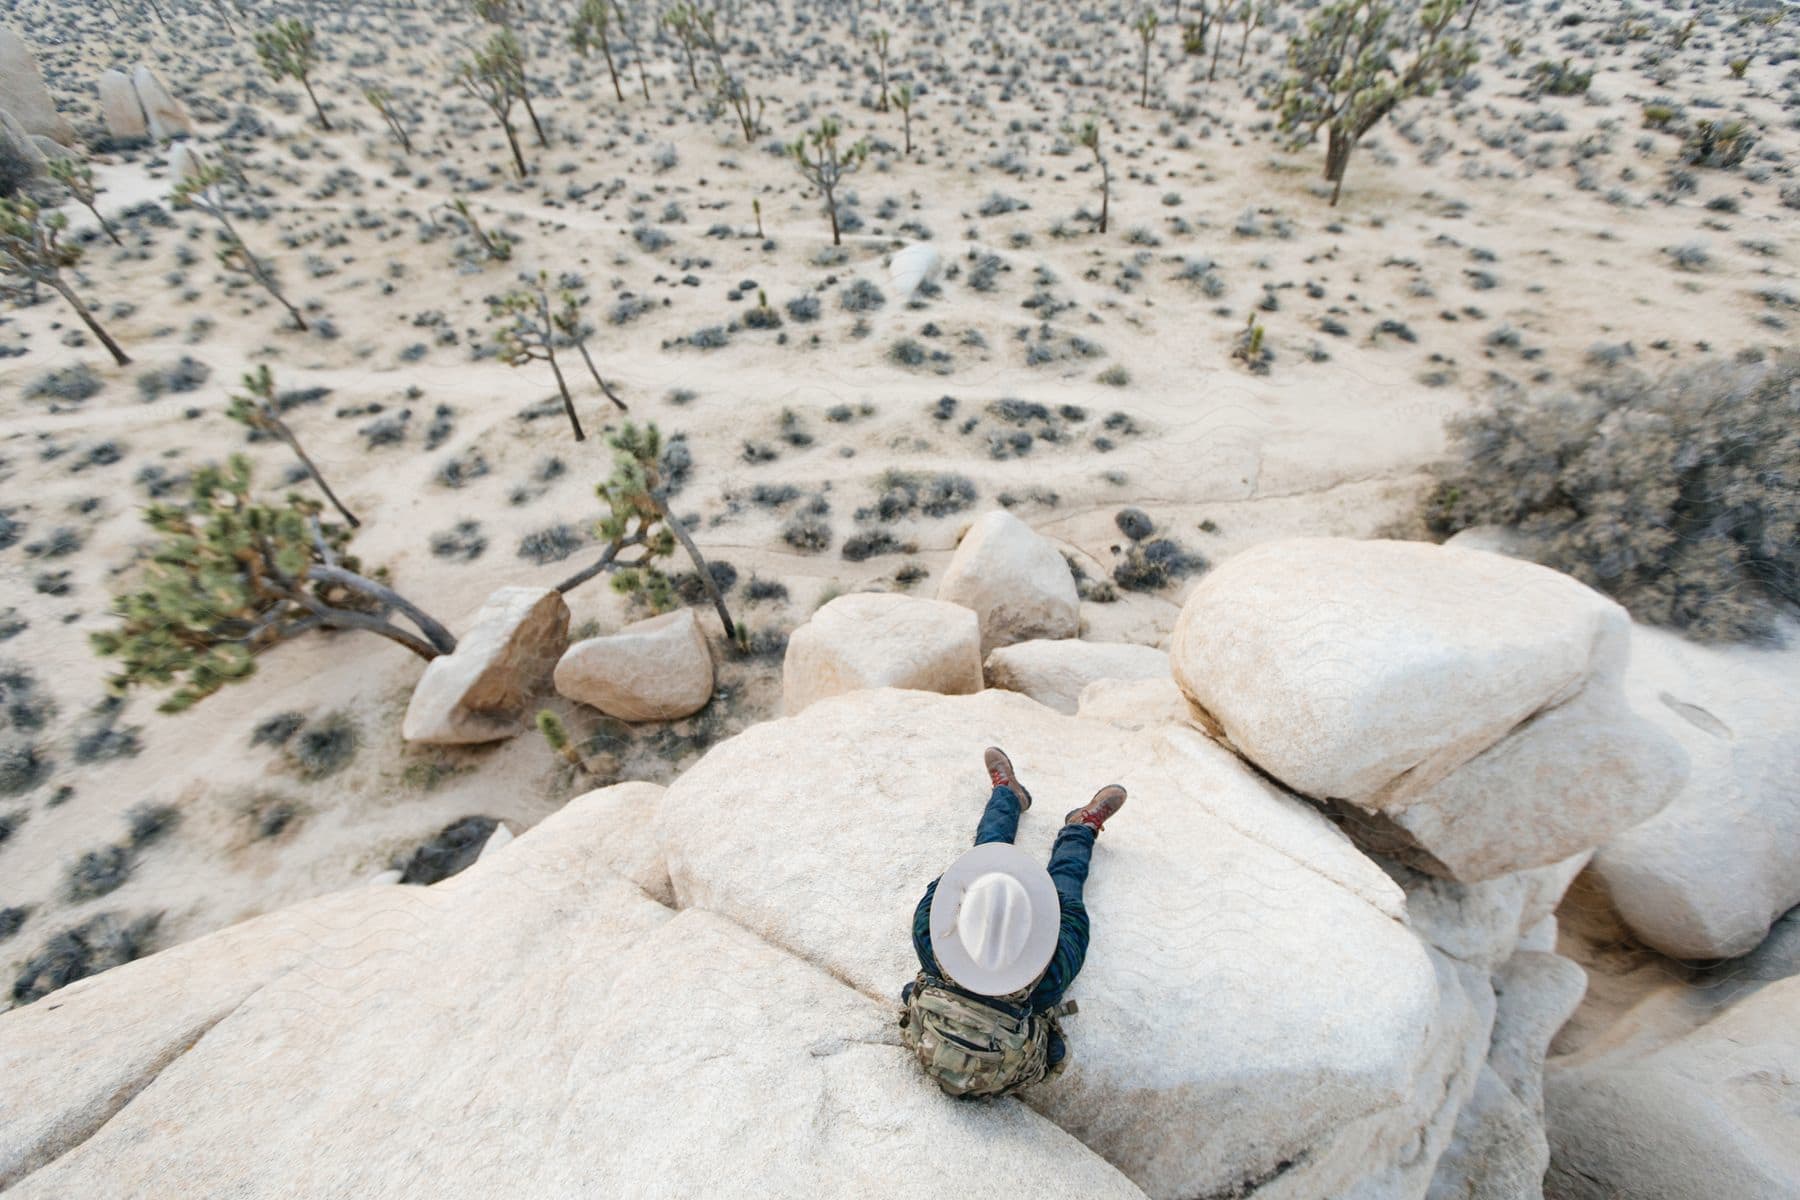 A man in his 20s30s wearing a cowboy hat backpack jacket and jeans sits on a rock in the desert observing his surroundings